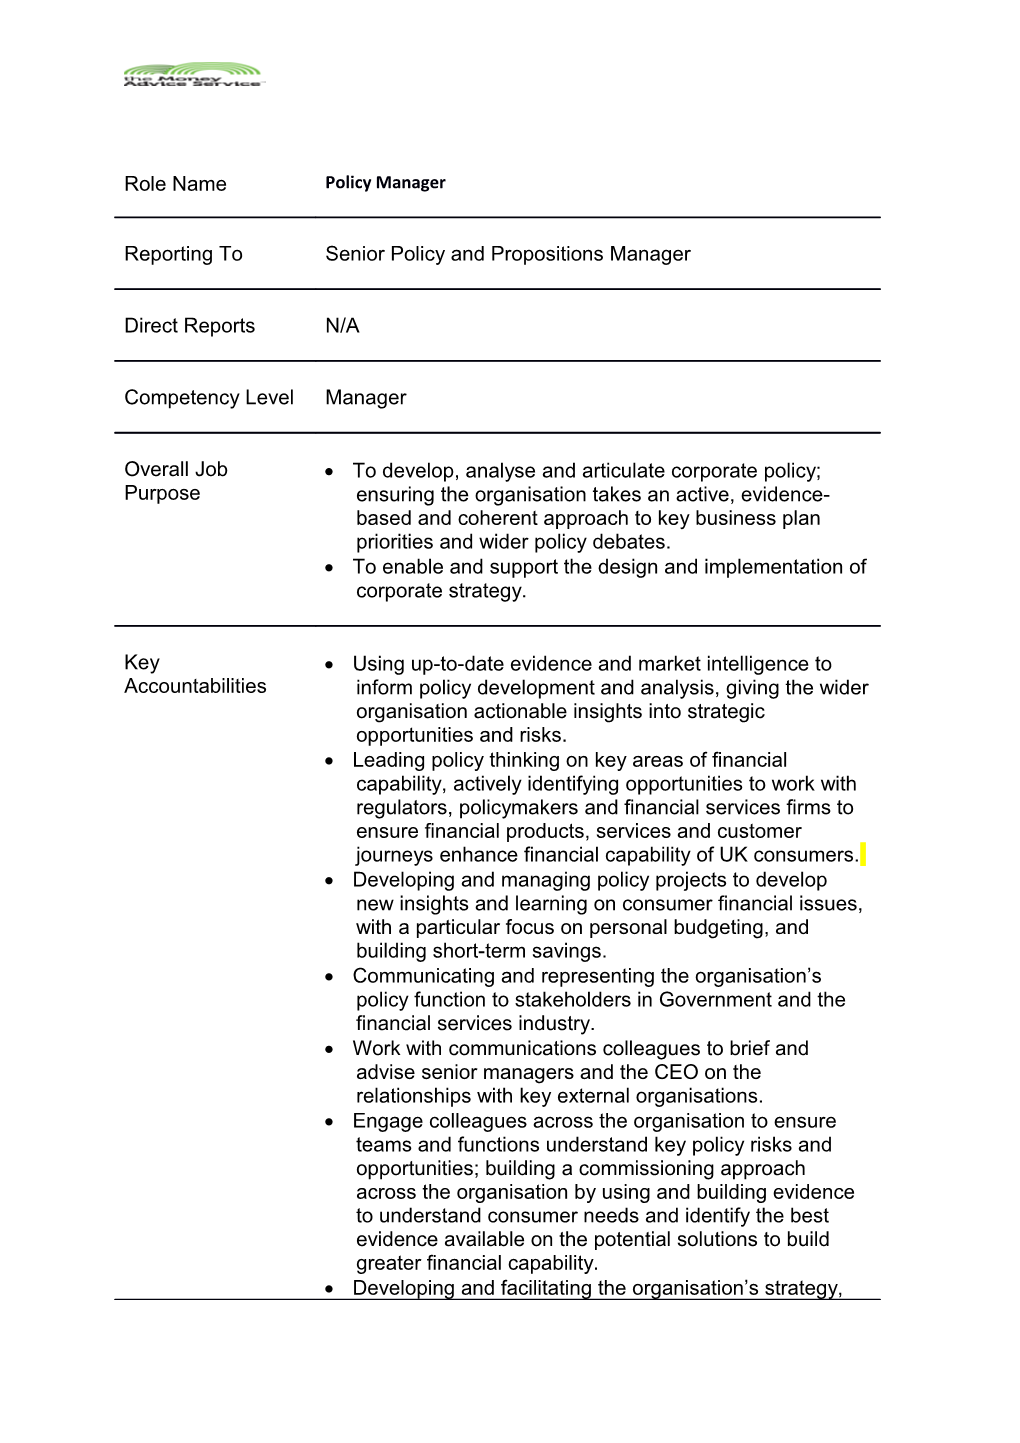 Policy Manager